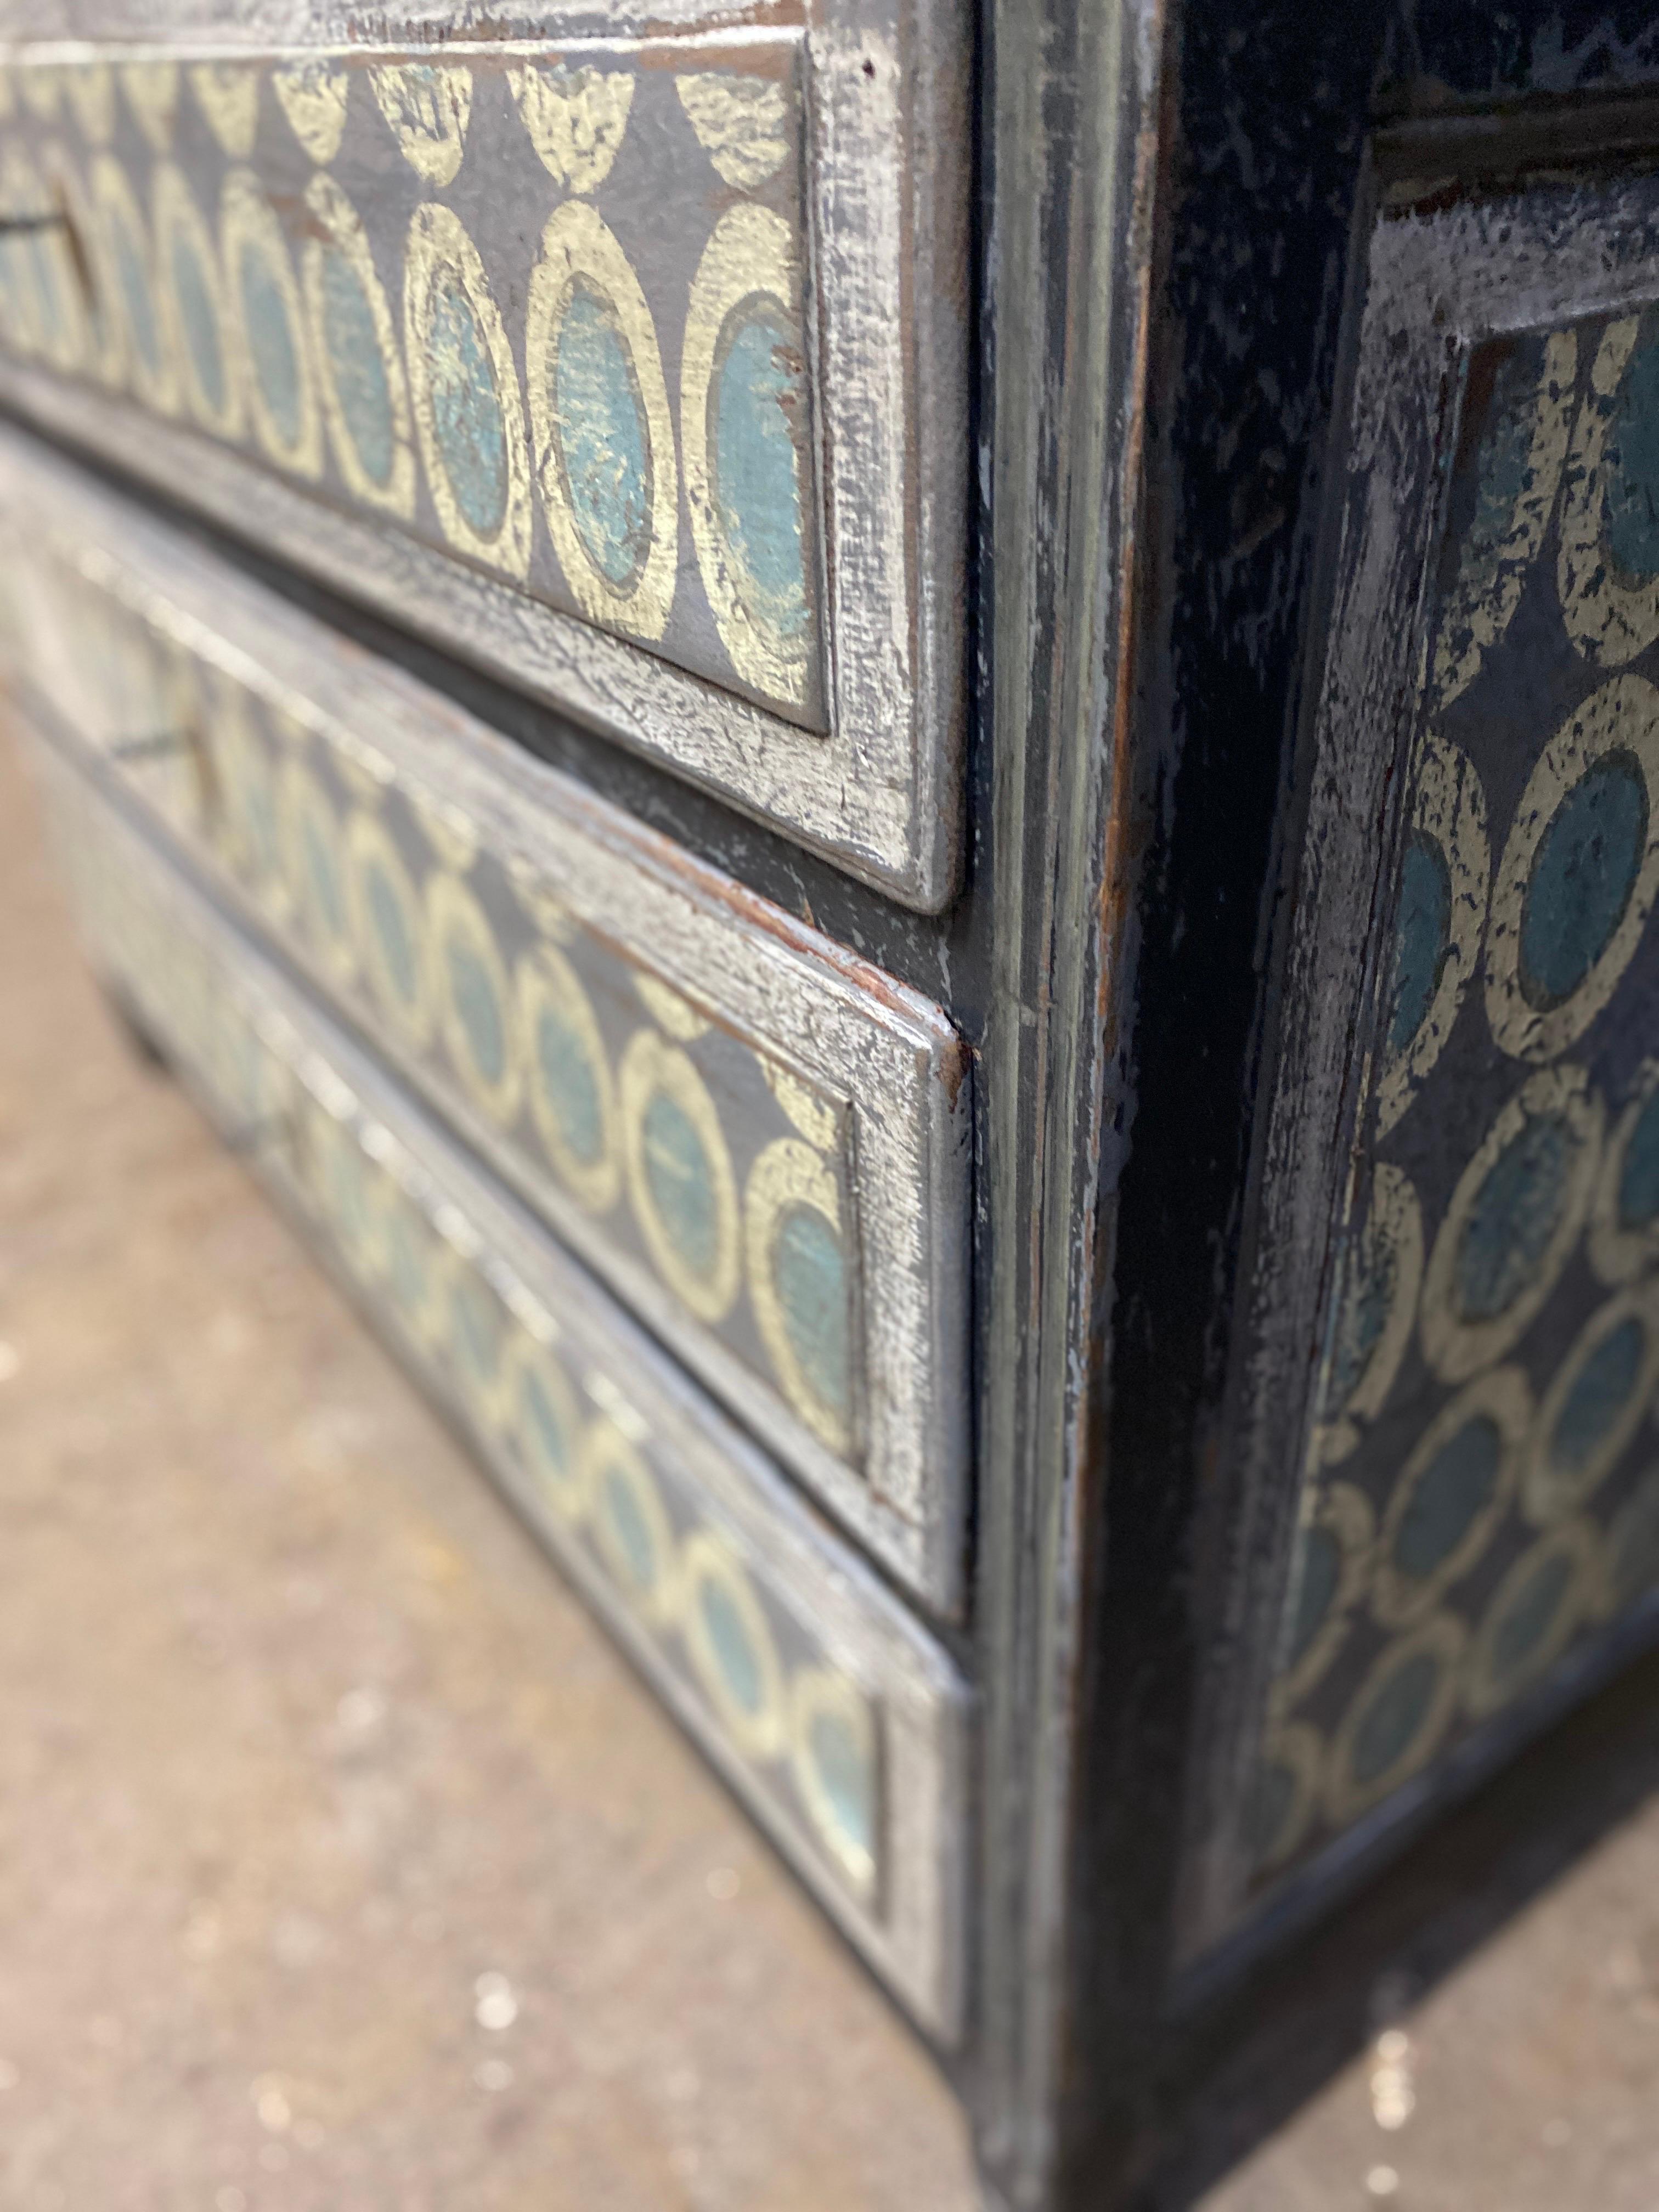 Louis xvi chest of drawers 3 patina drawers with different shapes and colors For Sale 1